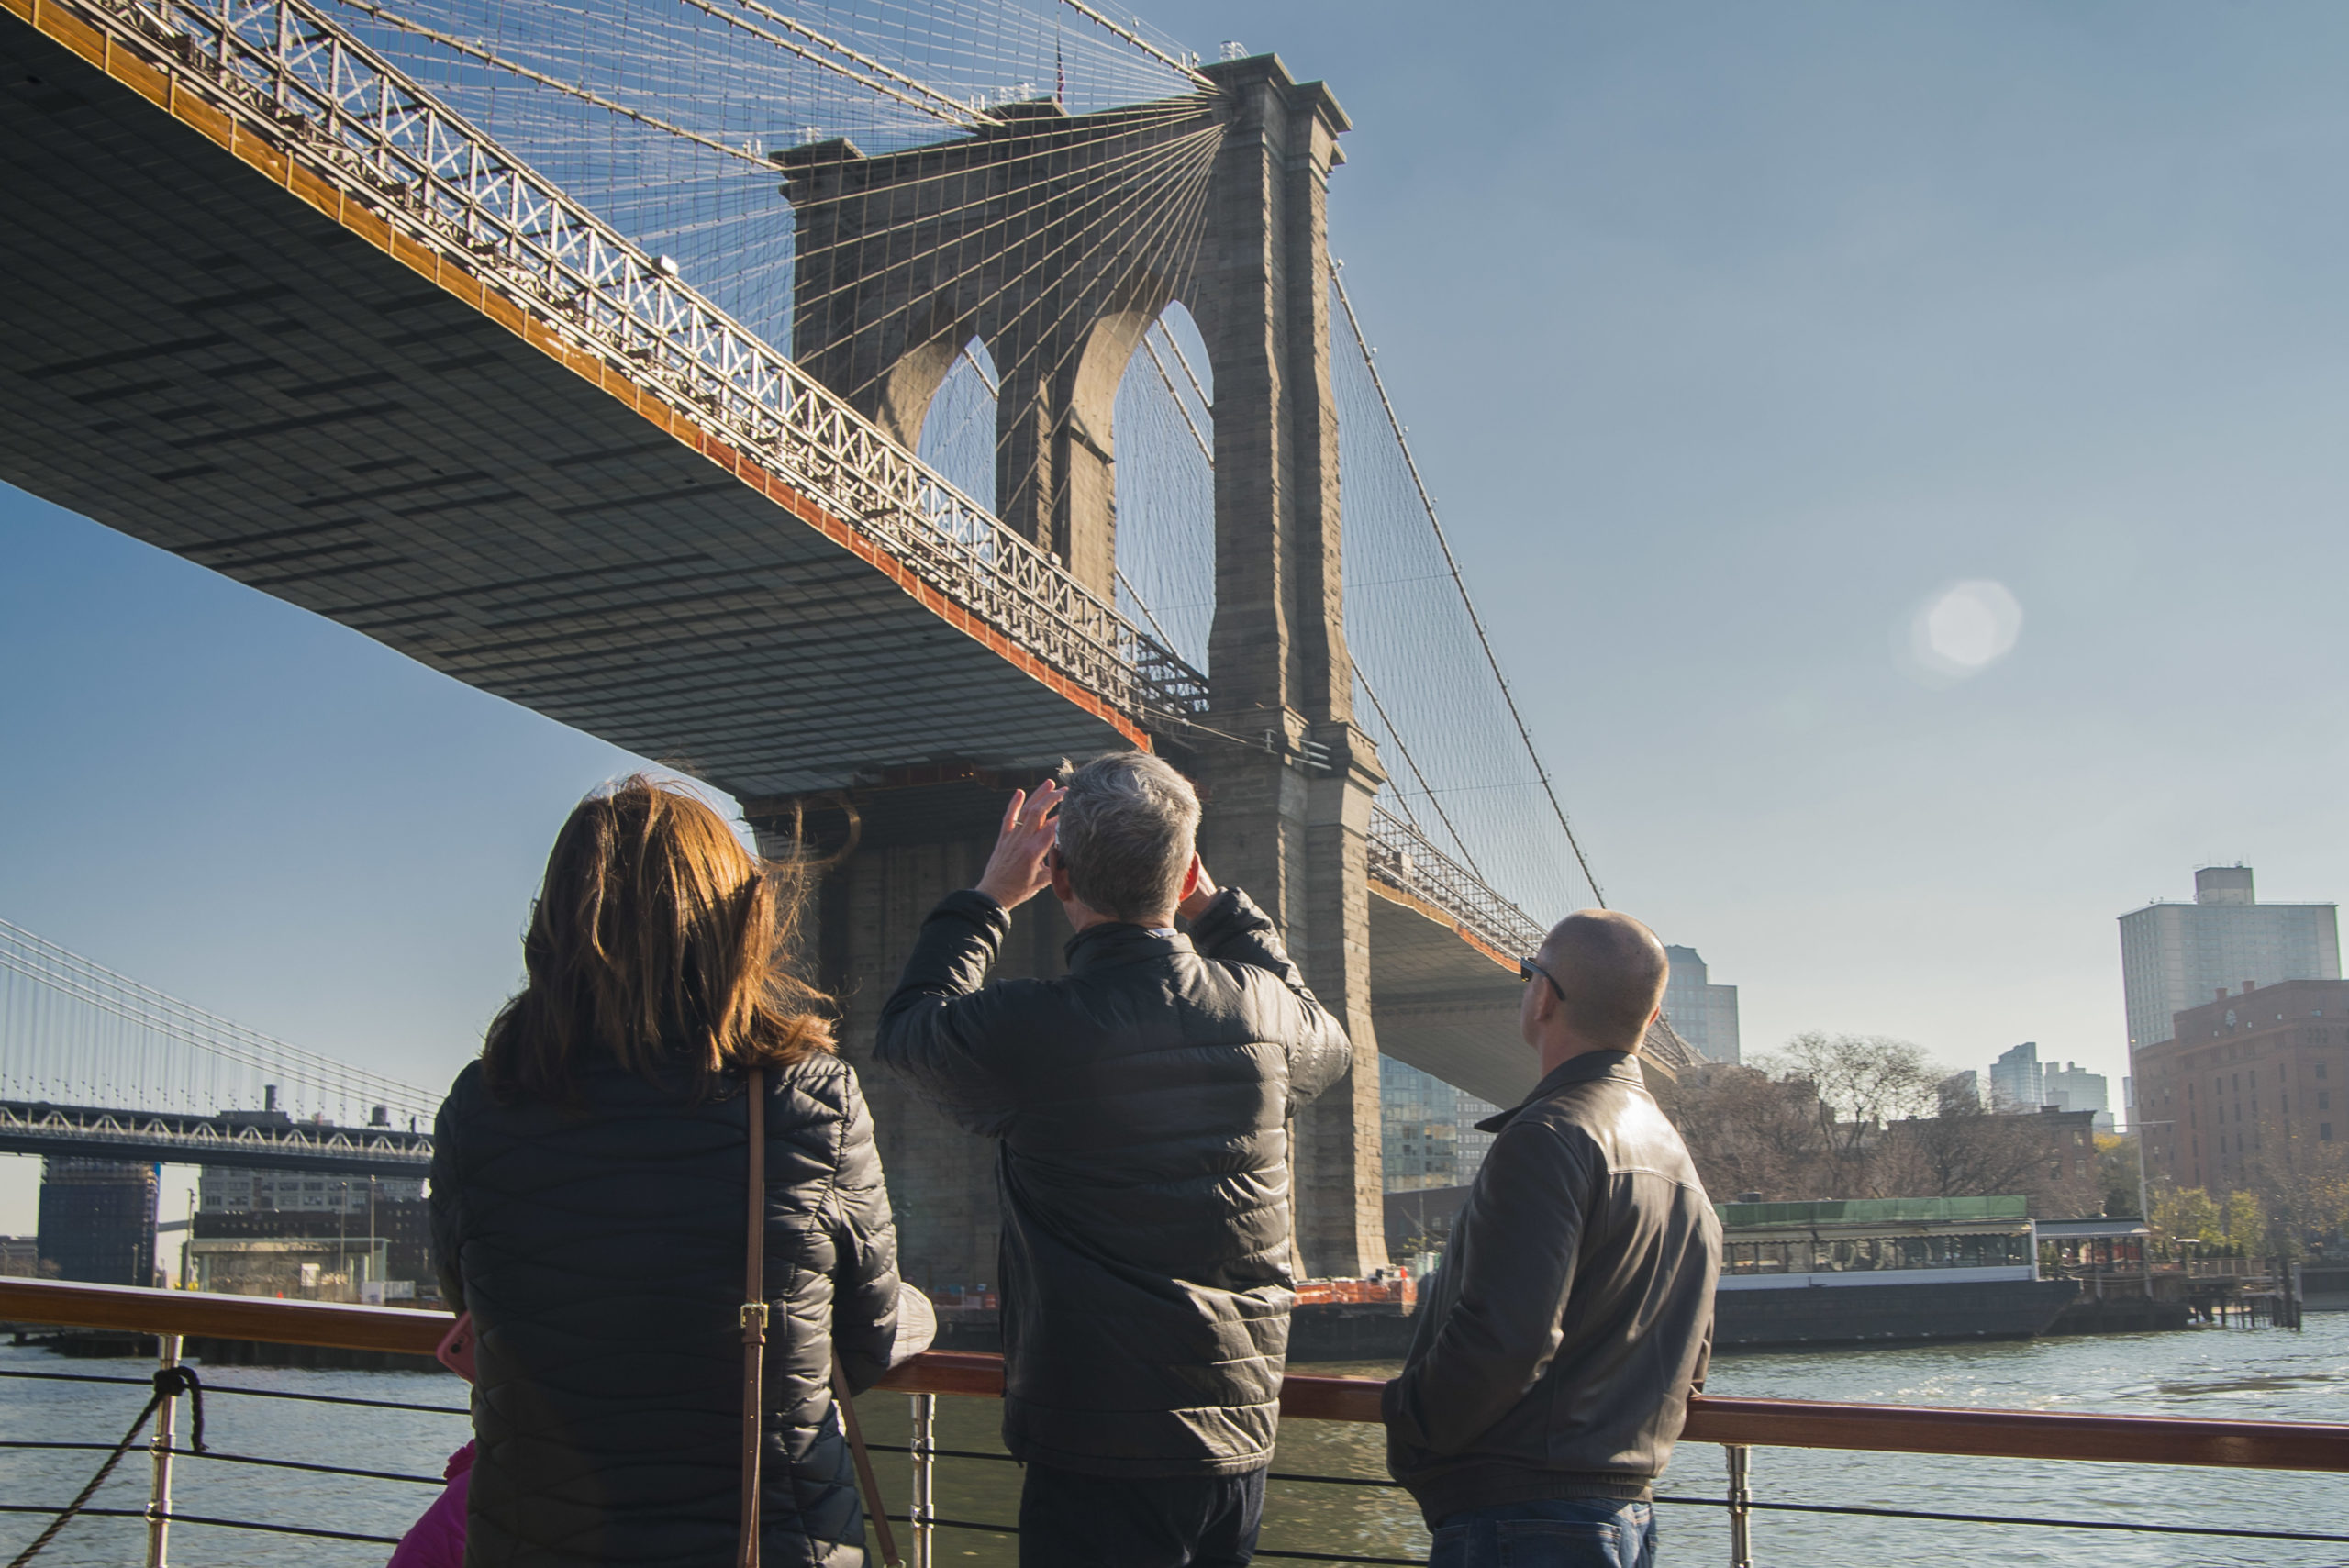 The Brooklyn Bridge as seen from the deck of a Classic Harbor Line yacht with a few people standing in the foreground and taking photos of the bridge